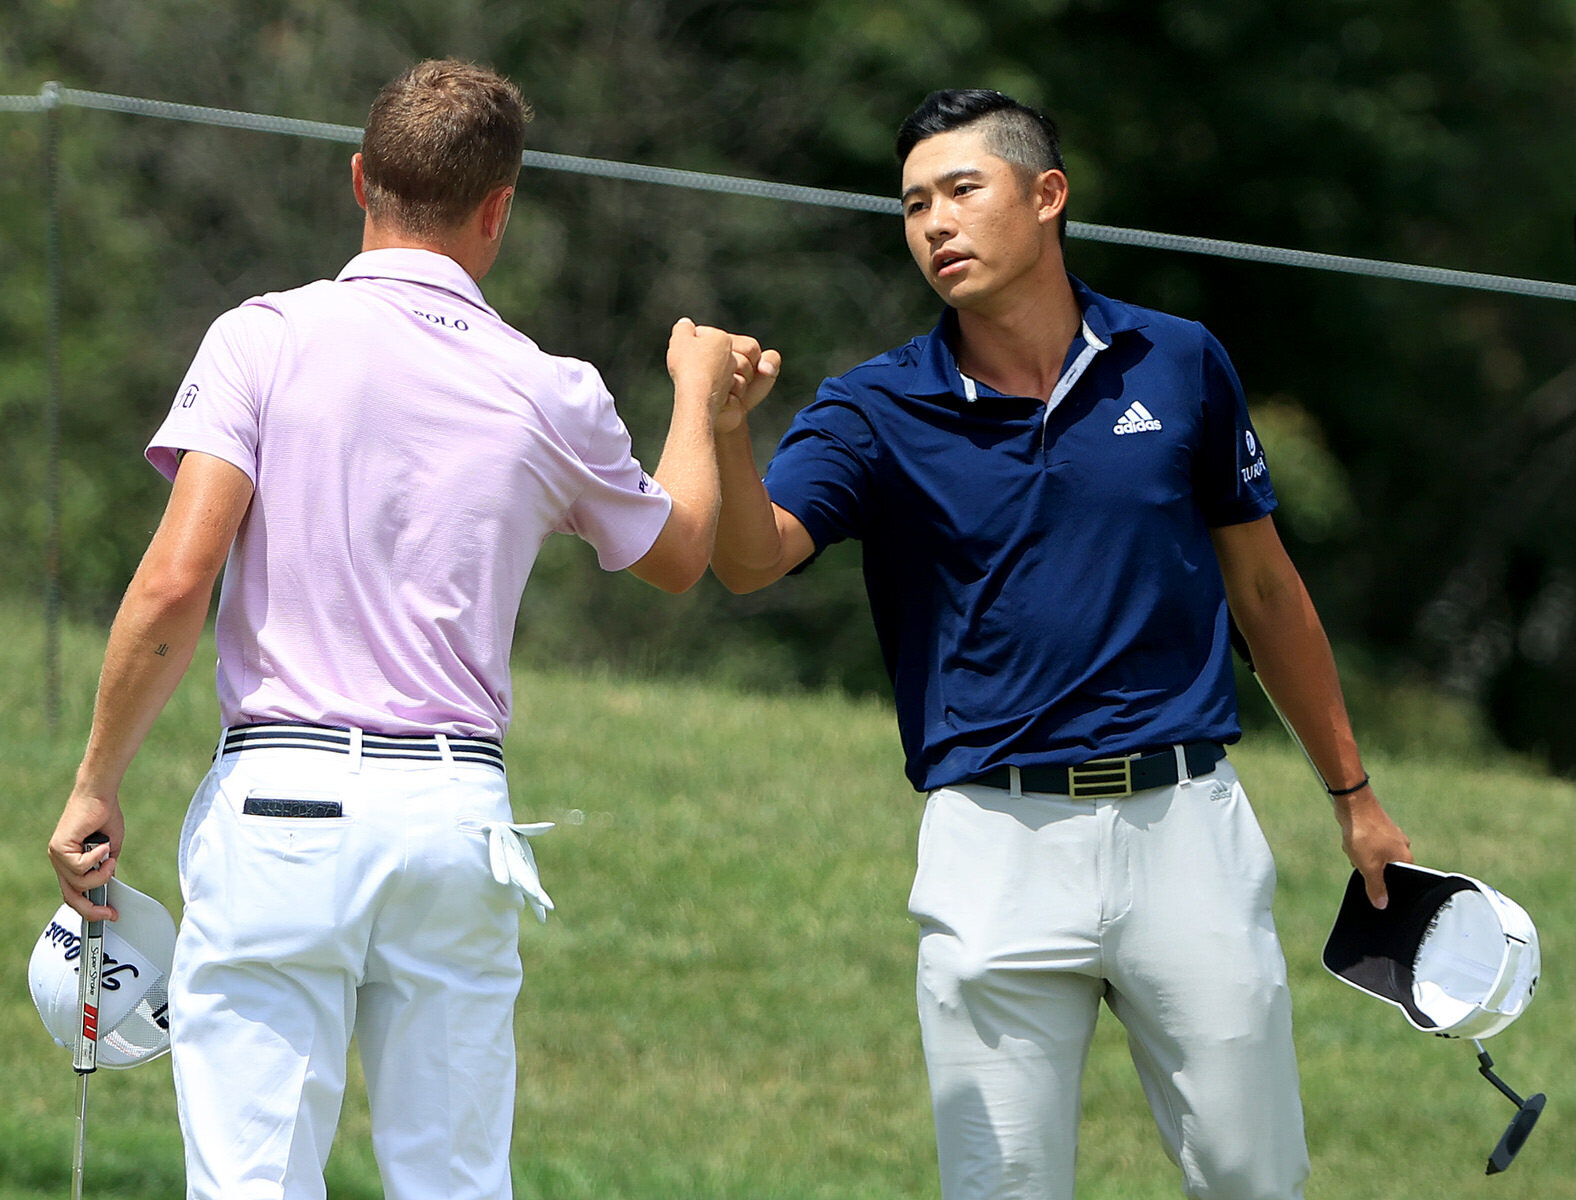  DUBLIN, OHIO - JULY 12: Collin Morikawa of the United States is congratulated by Justin Thomas of the United States after Morikawa 
defeated Thomas on the tenth green in the third playoff hole during the final round of the Workday Charity Open on Ju